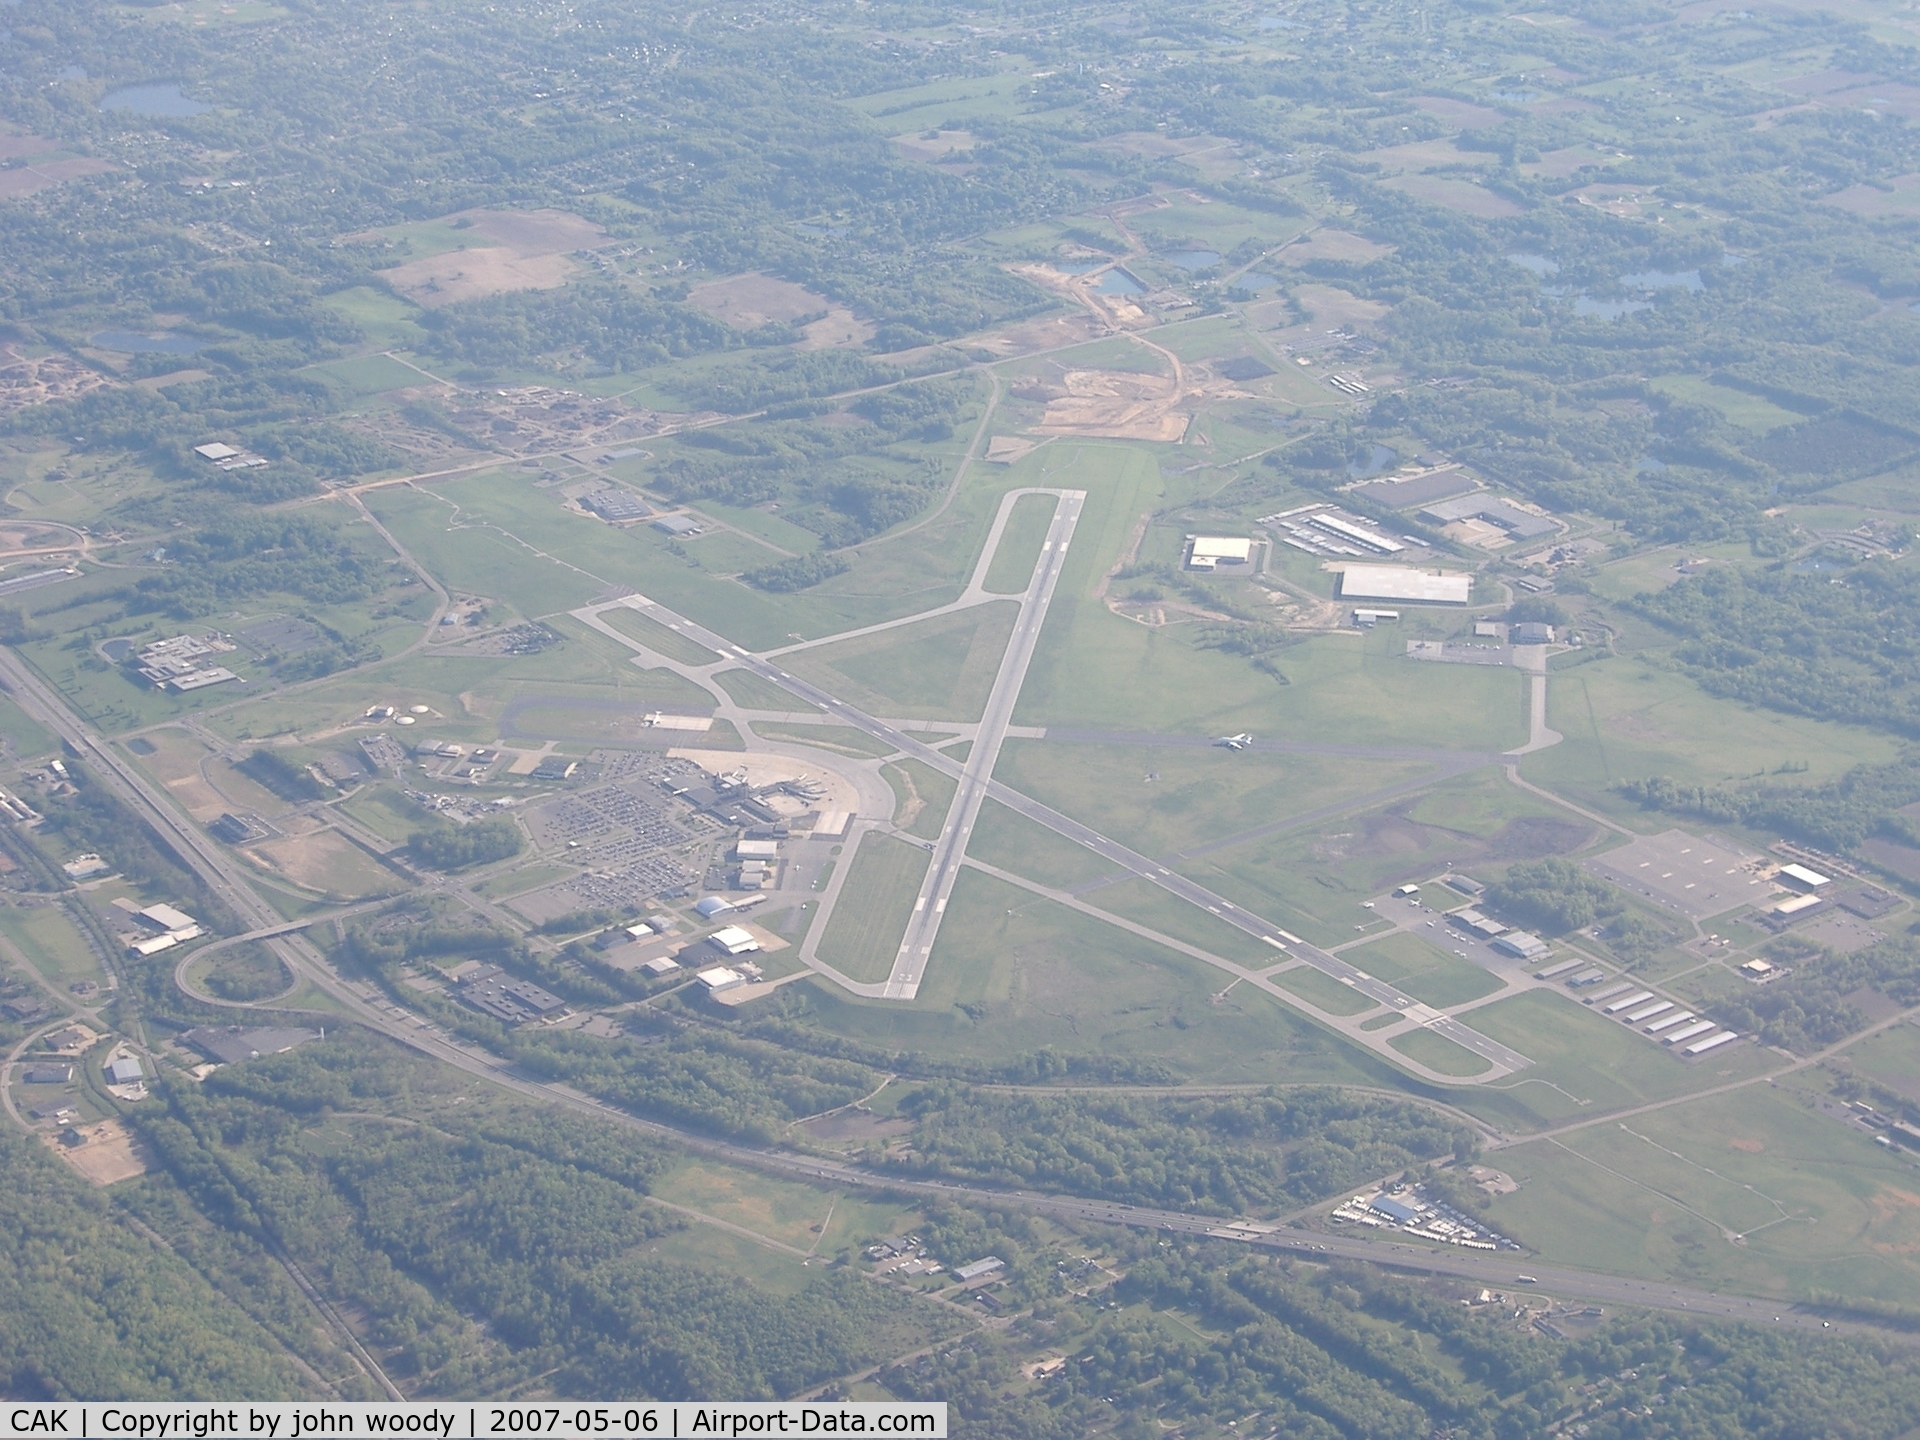 Akron-canton Regional Airport (CAK) - overview looking southwest